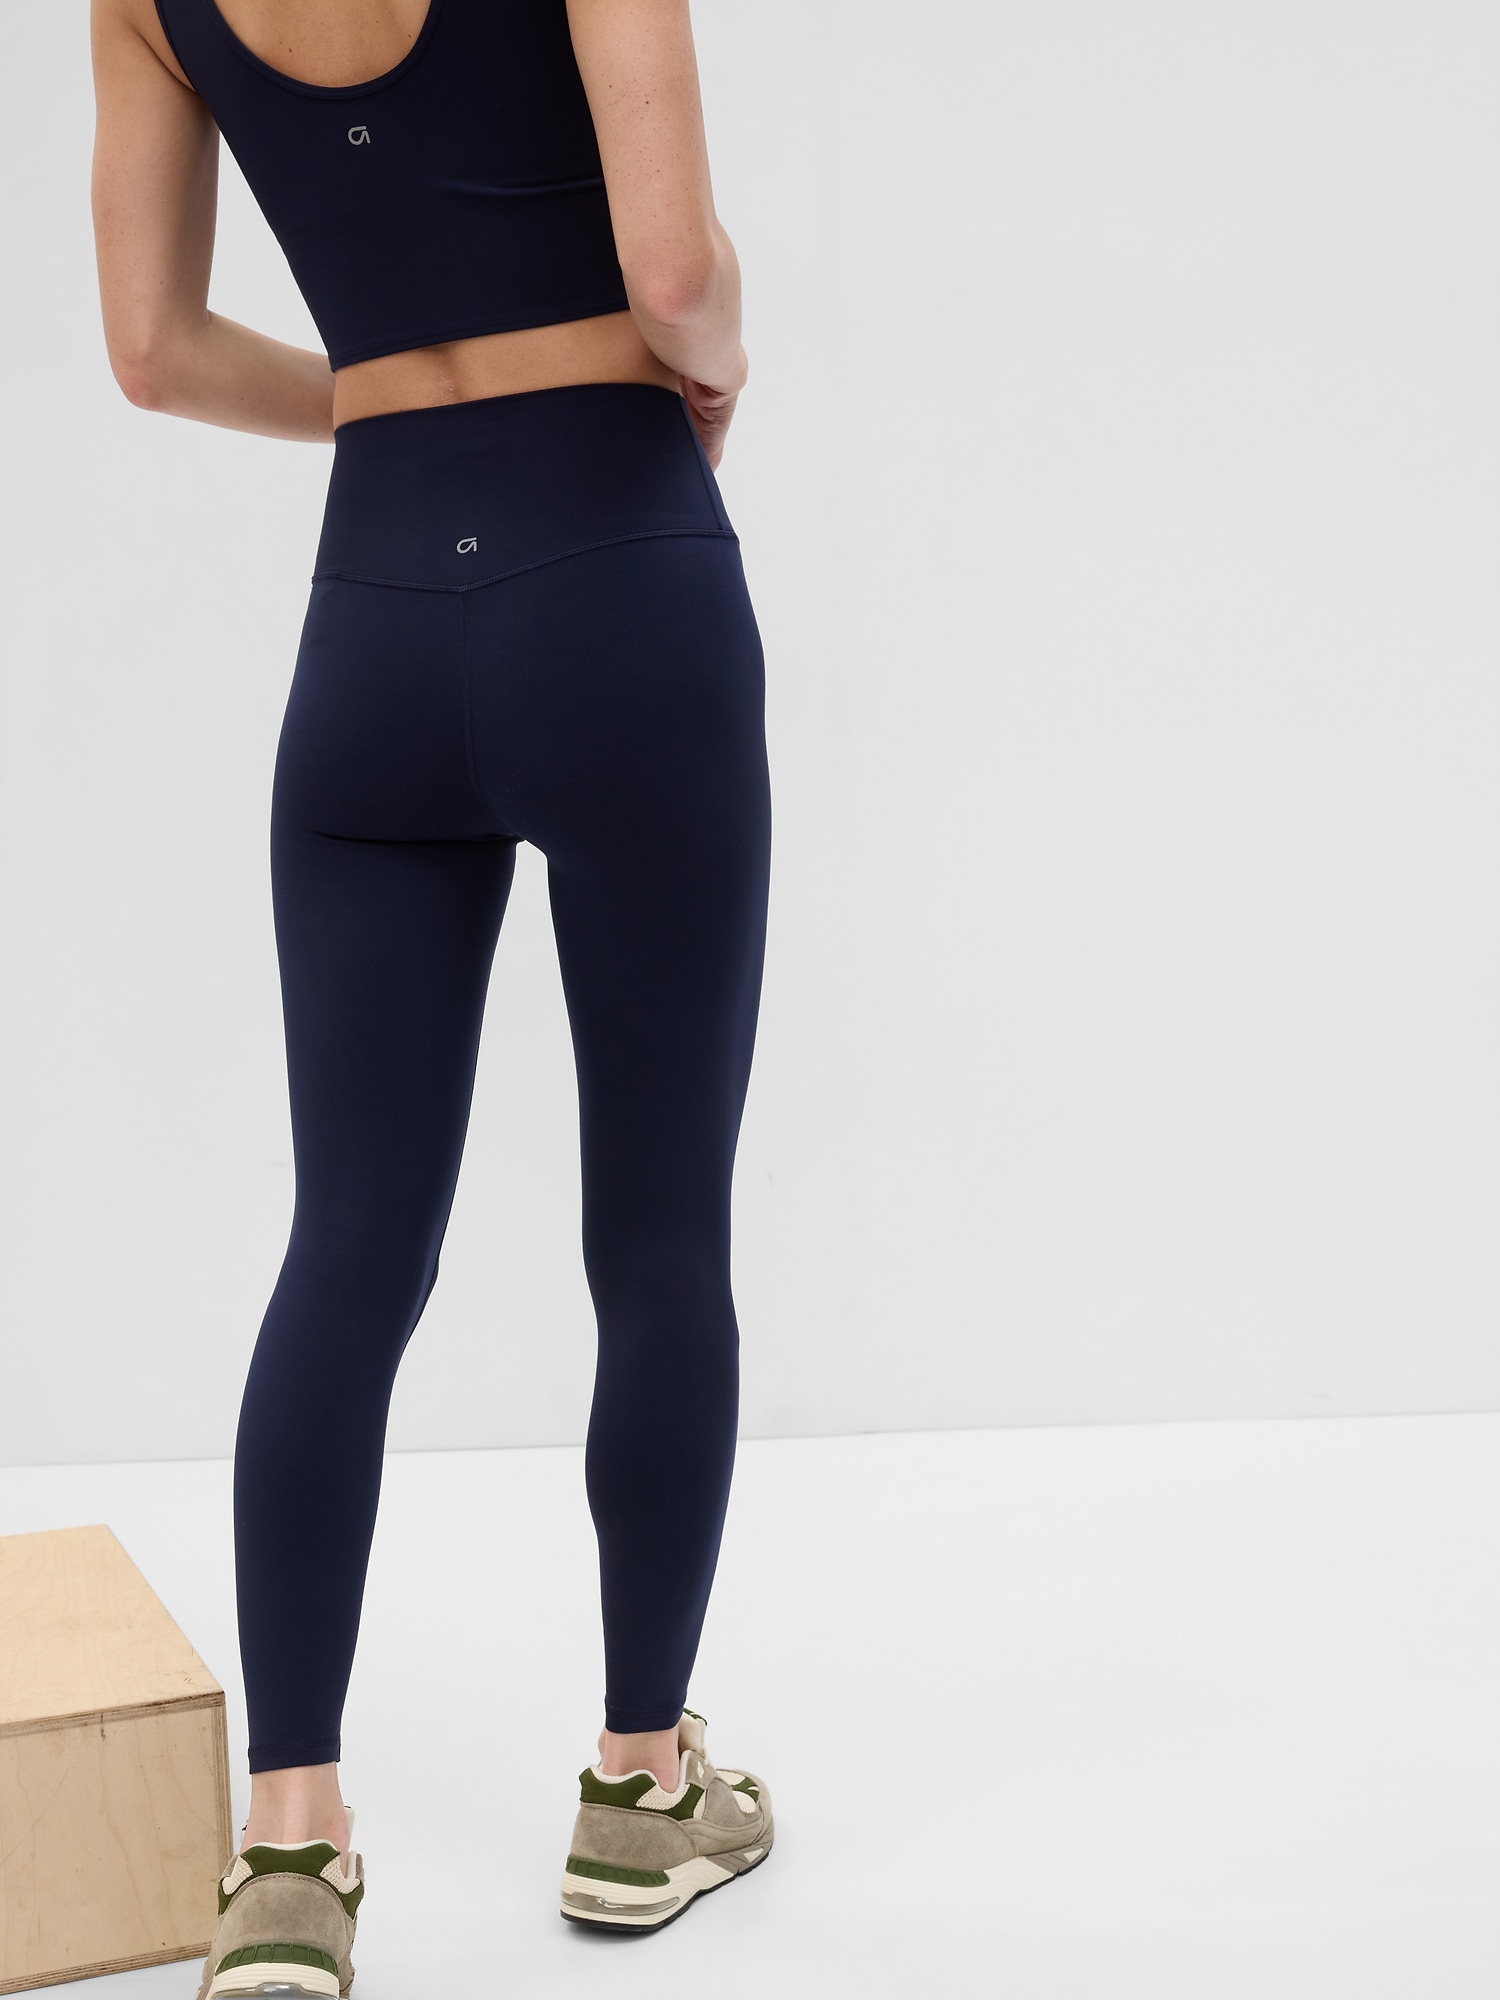 8 Workout Leggings I Swear by — Breathable, Comfortable, and